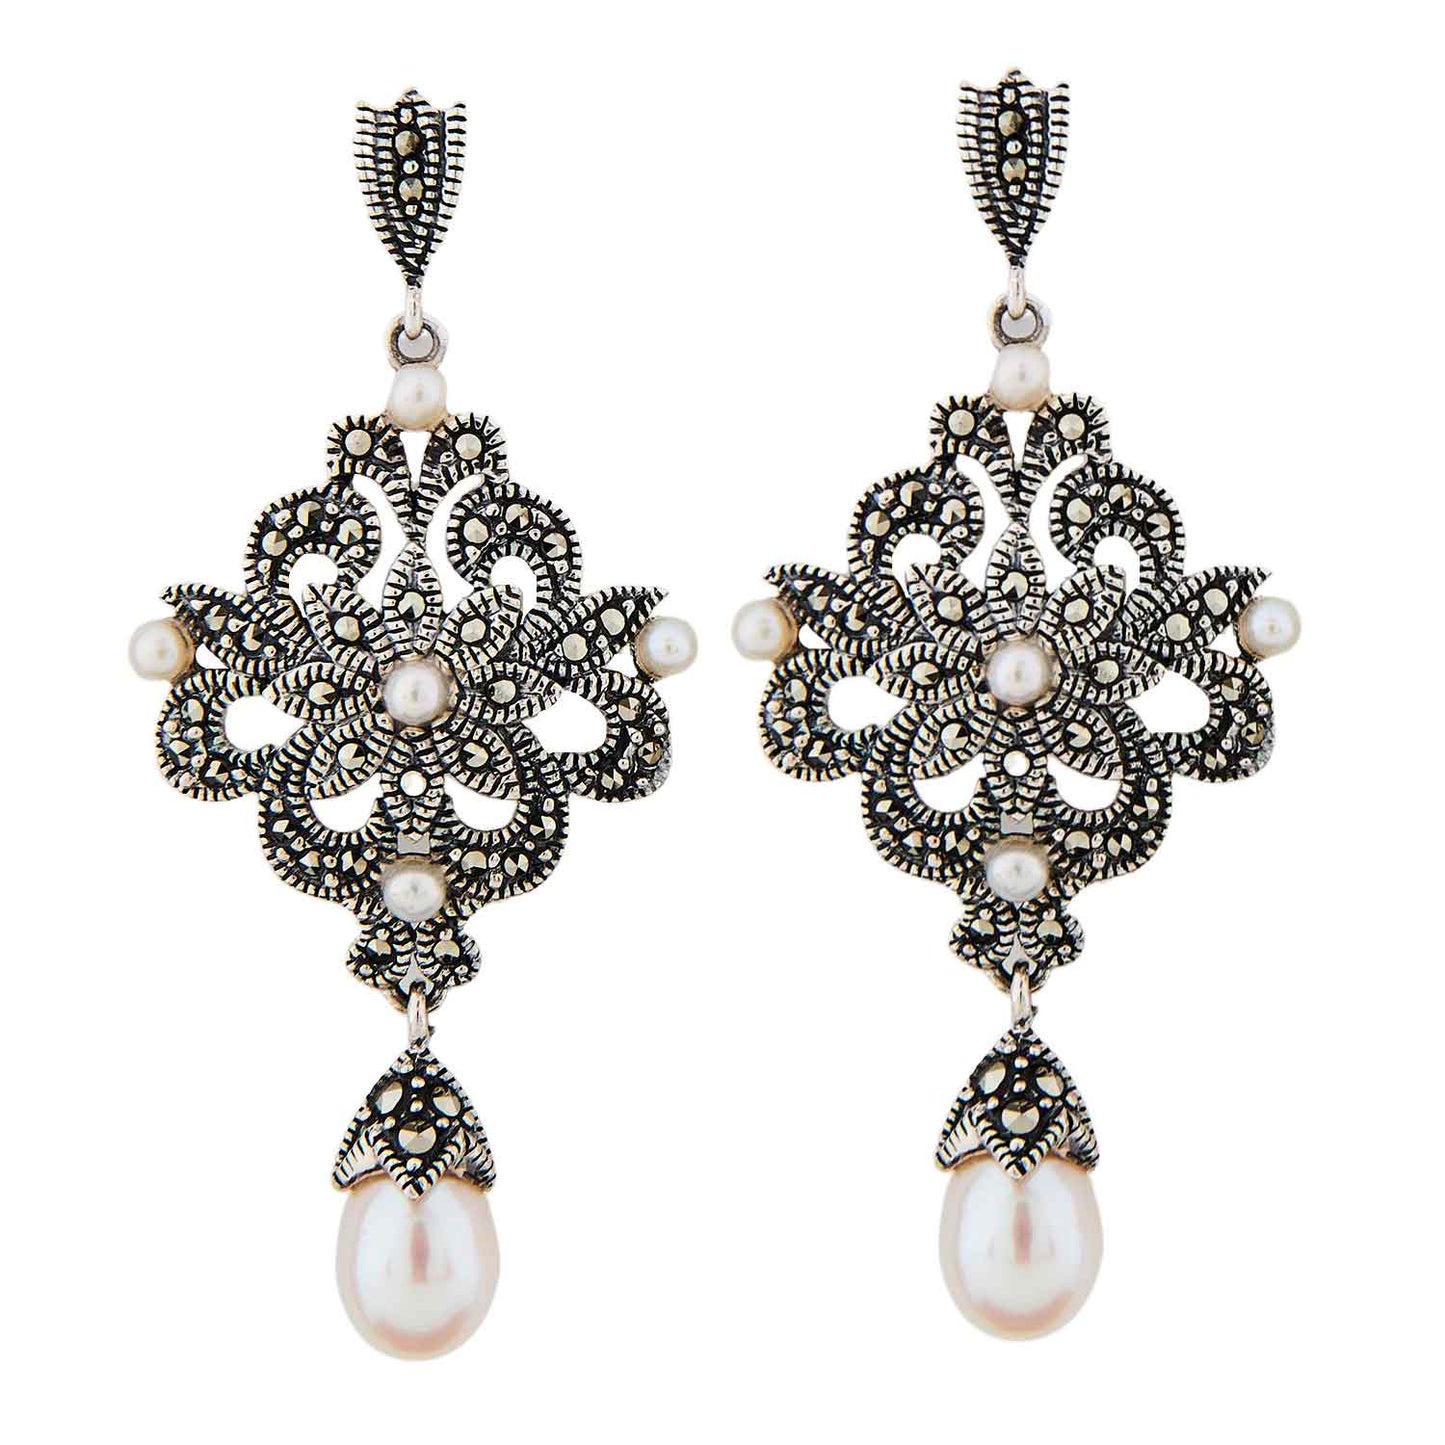 Verity: Edwardian Style Earrings in Fresh Water Pearl, Marcasite and Sterling Silver